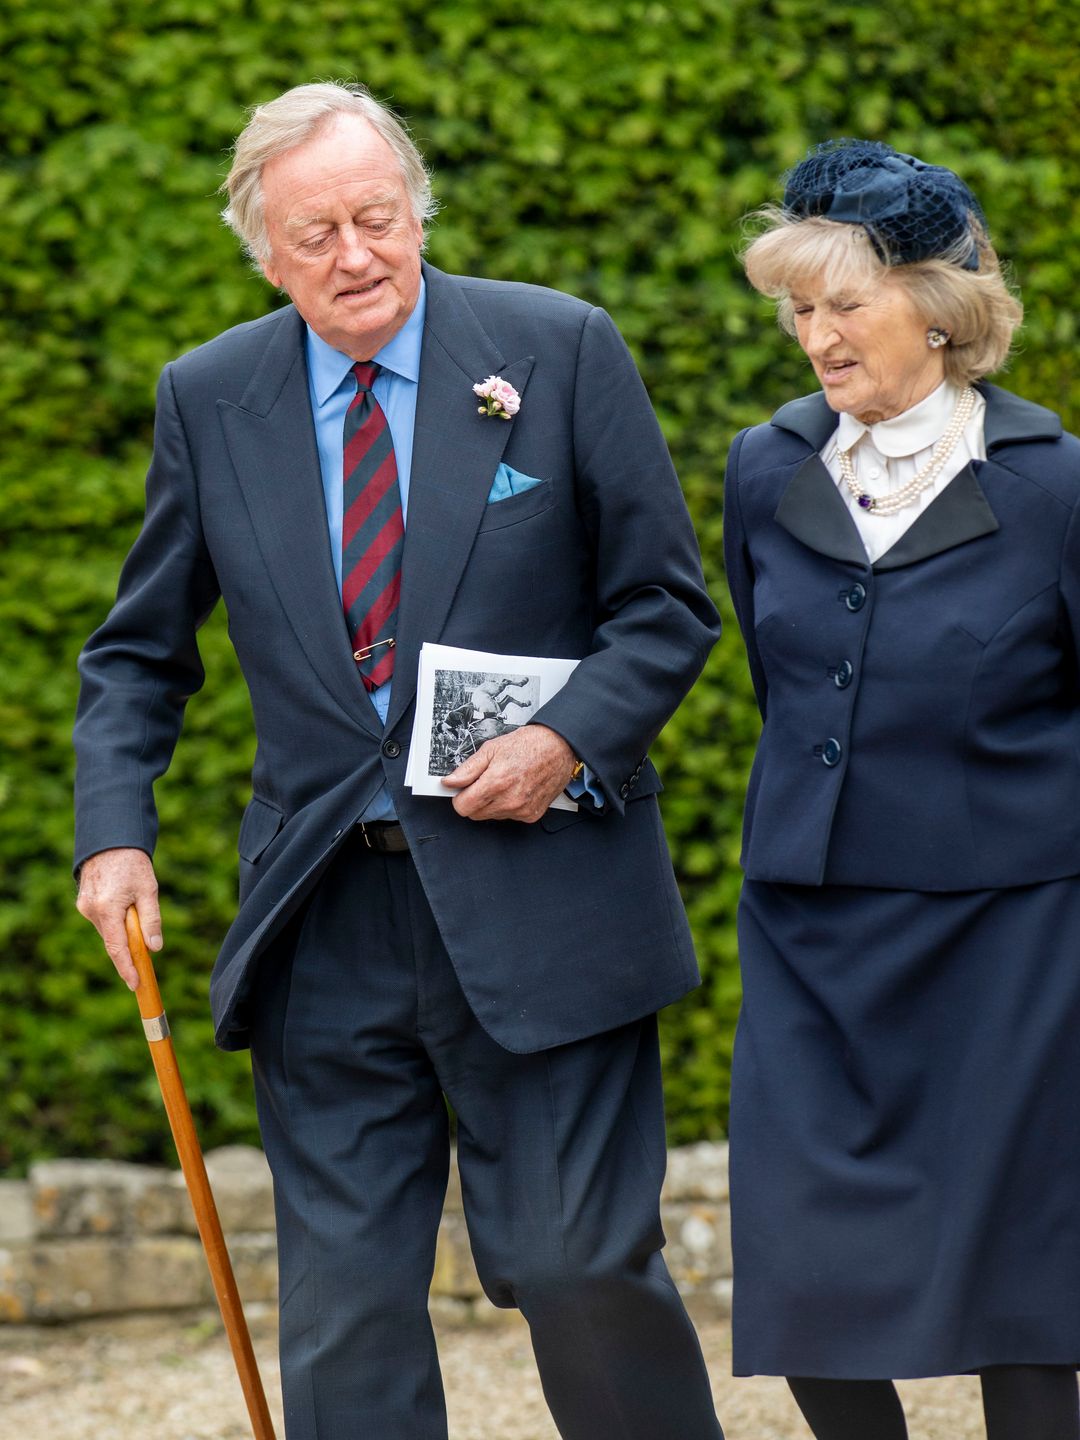 Andrew Parker Bowles walking with a walking stick and a woman